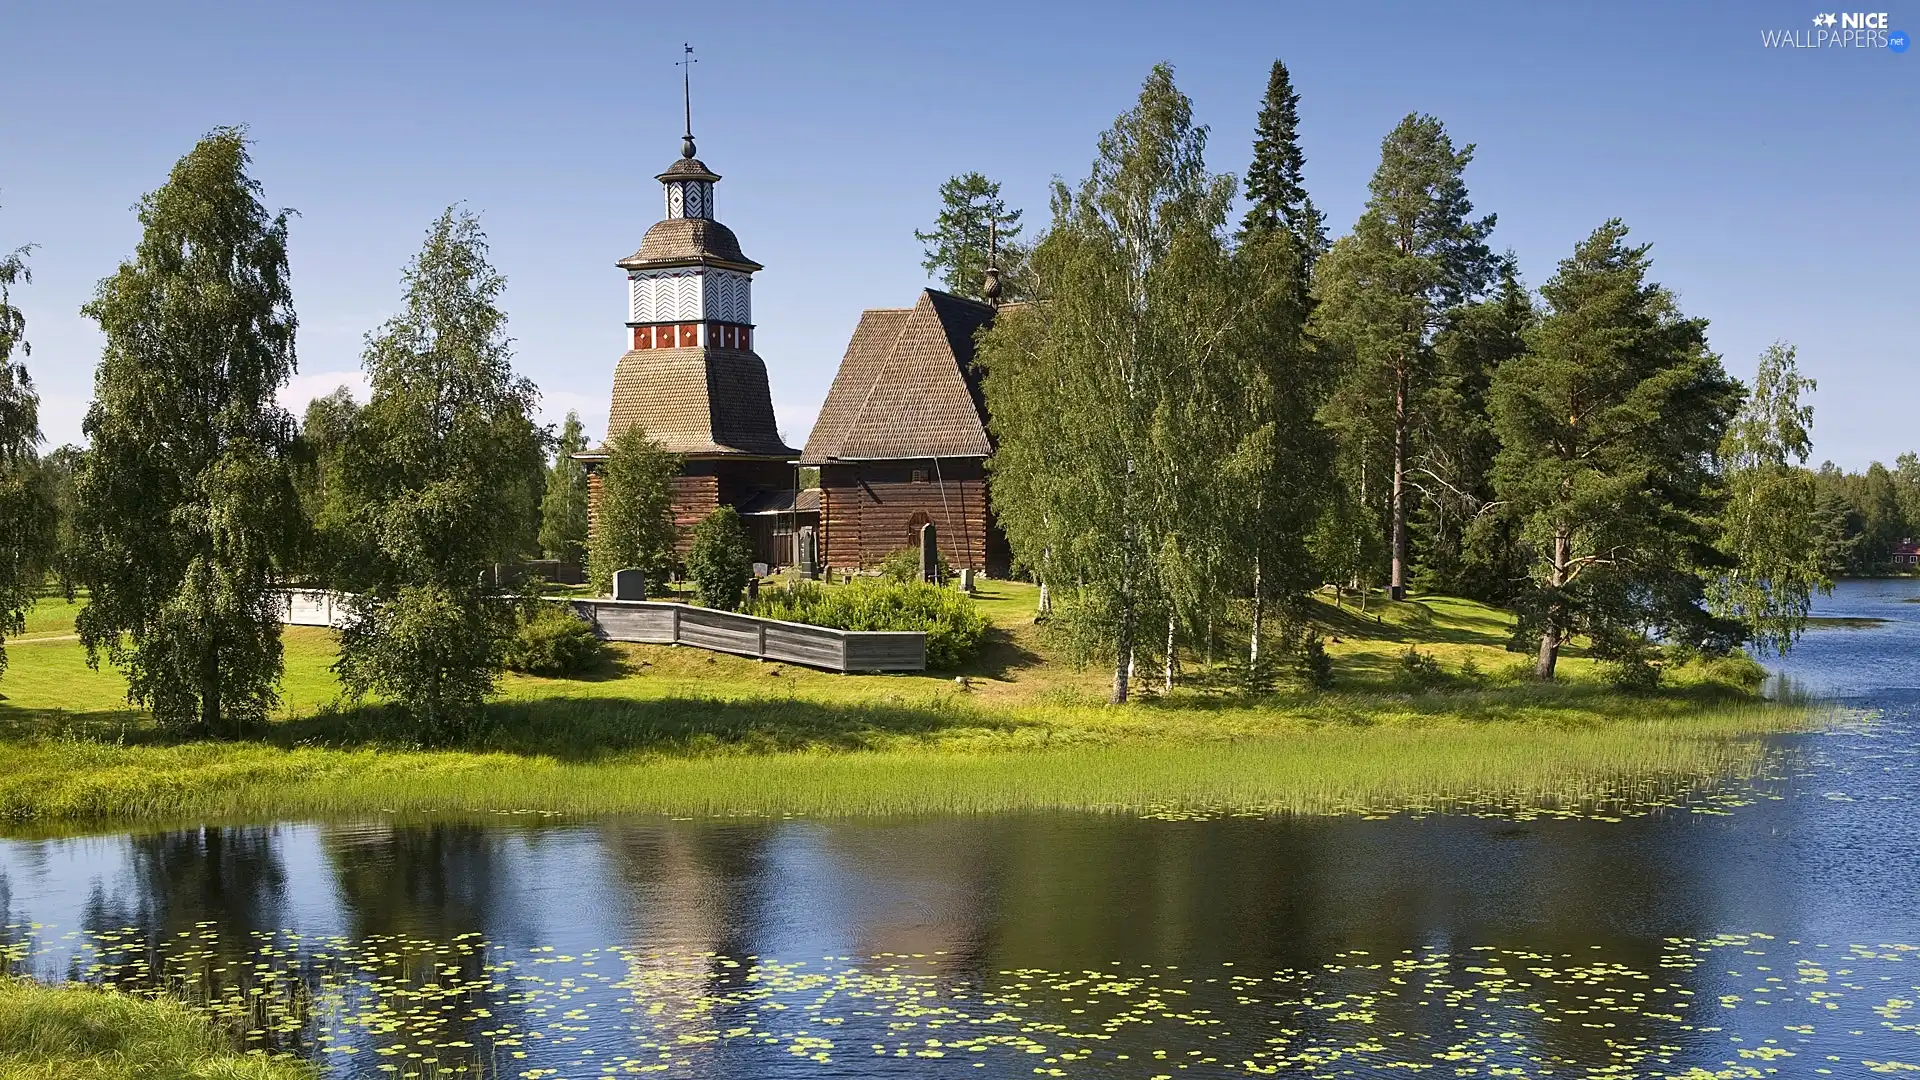 trees, viewes, Church, River, wooden